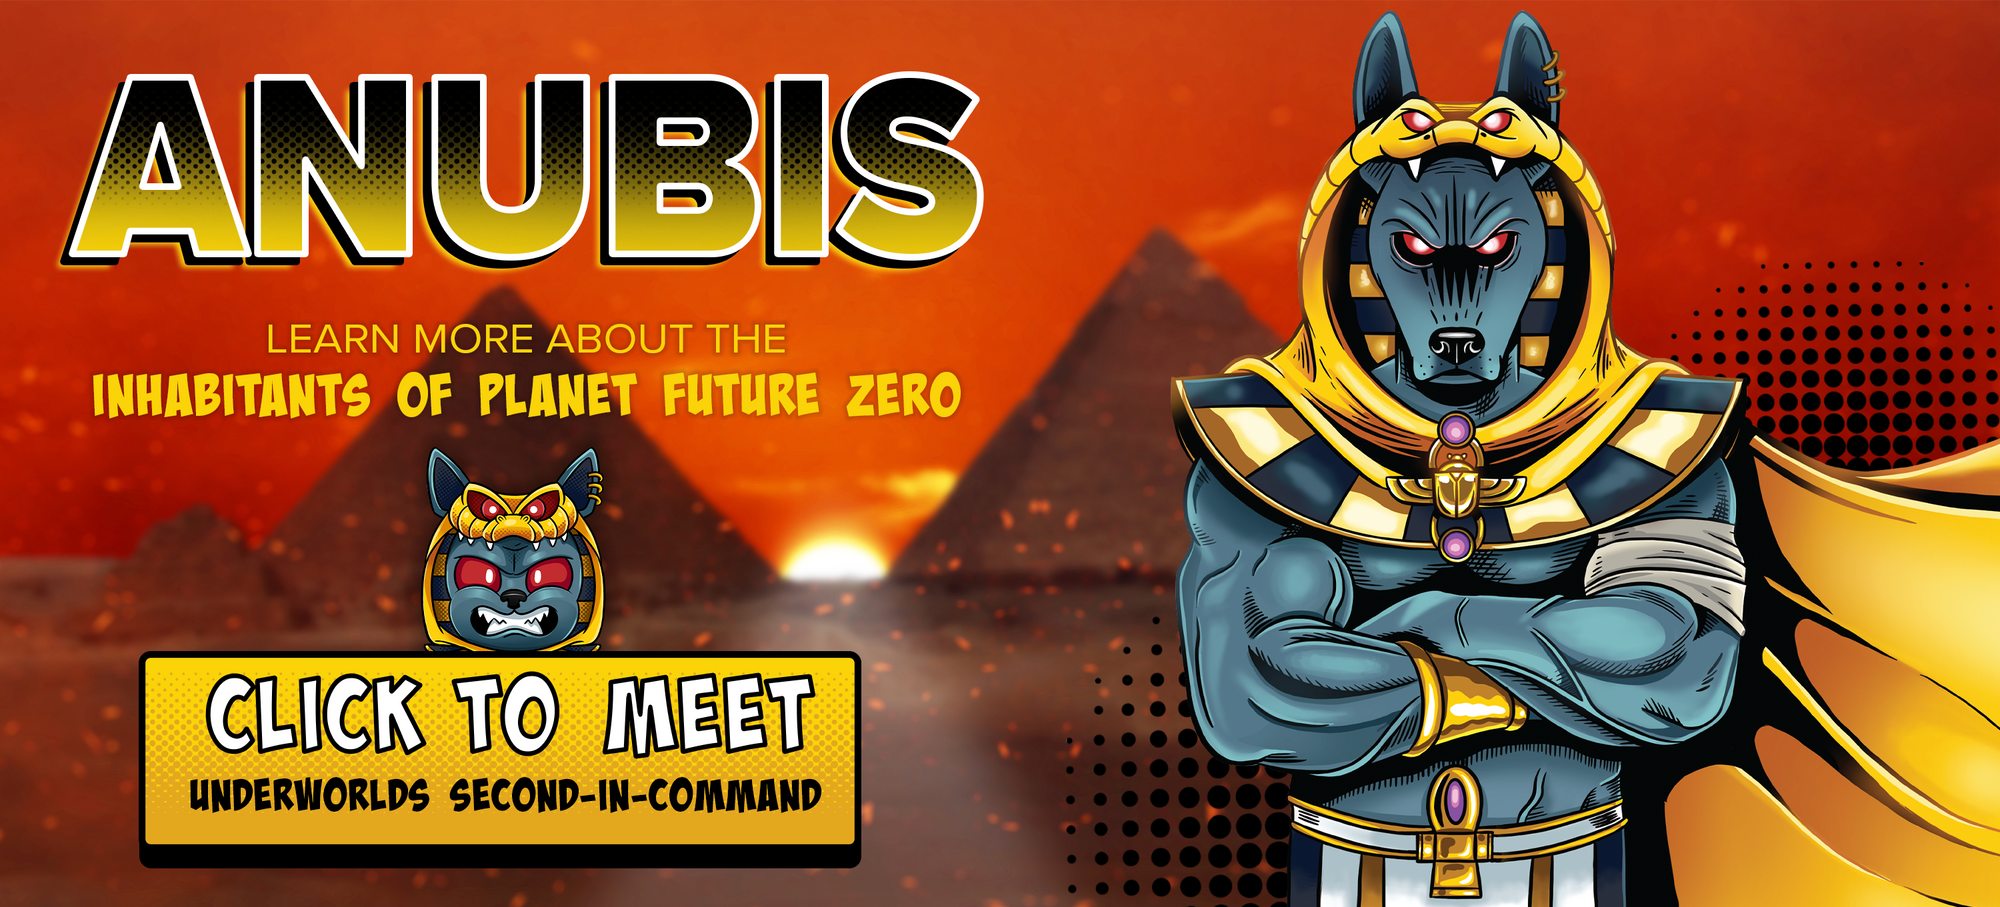 Title ANUBIS with Smashcraft Anubis Comic. Text "Learn more about the inhabitants of Planet Future Zero" and button with text "Click to meet Underworld's Second-In-Command" with chibi Anubis